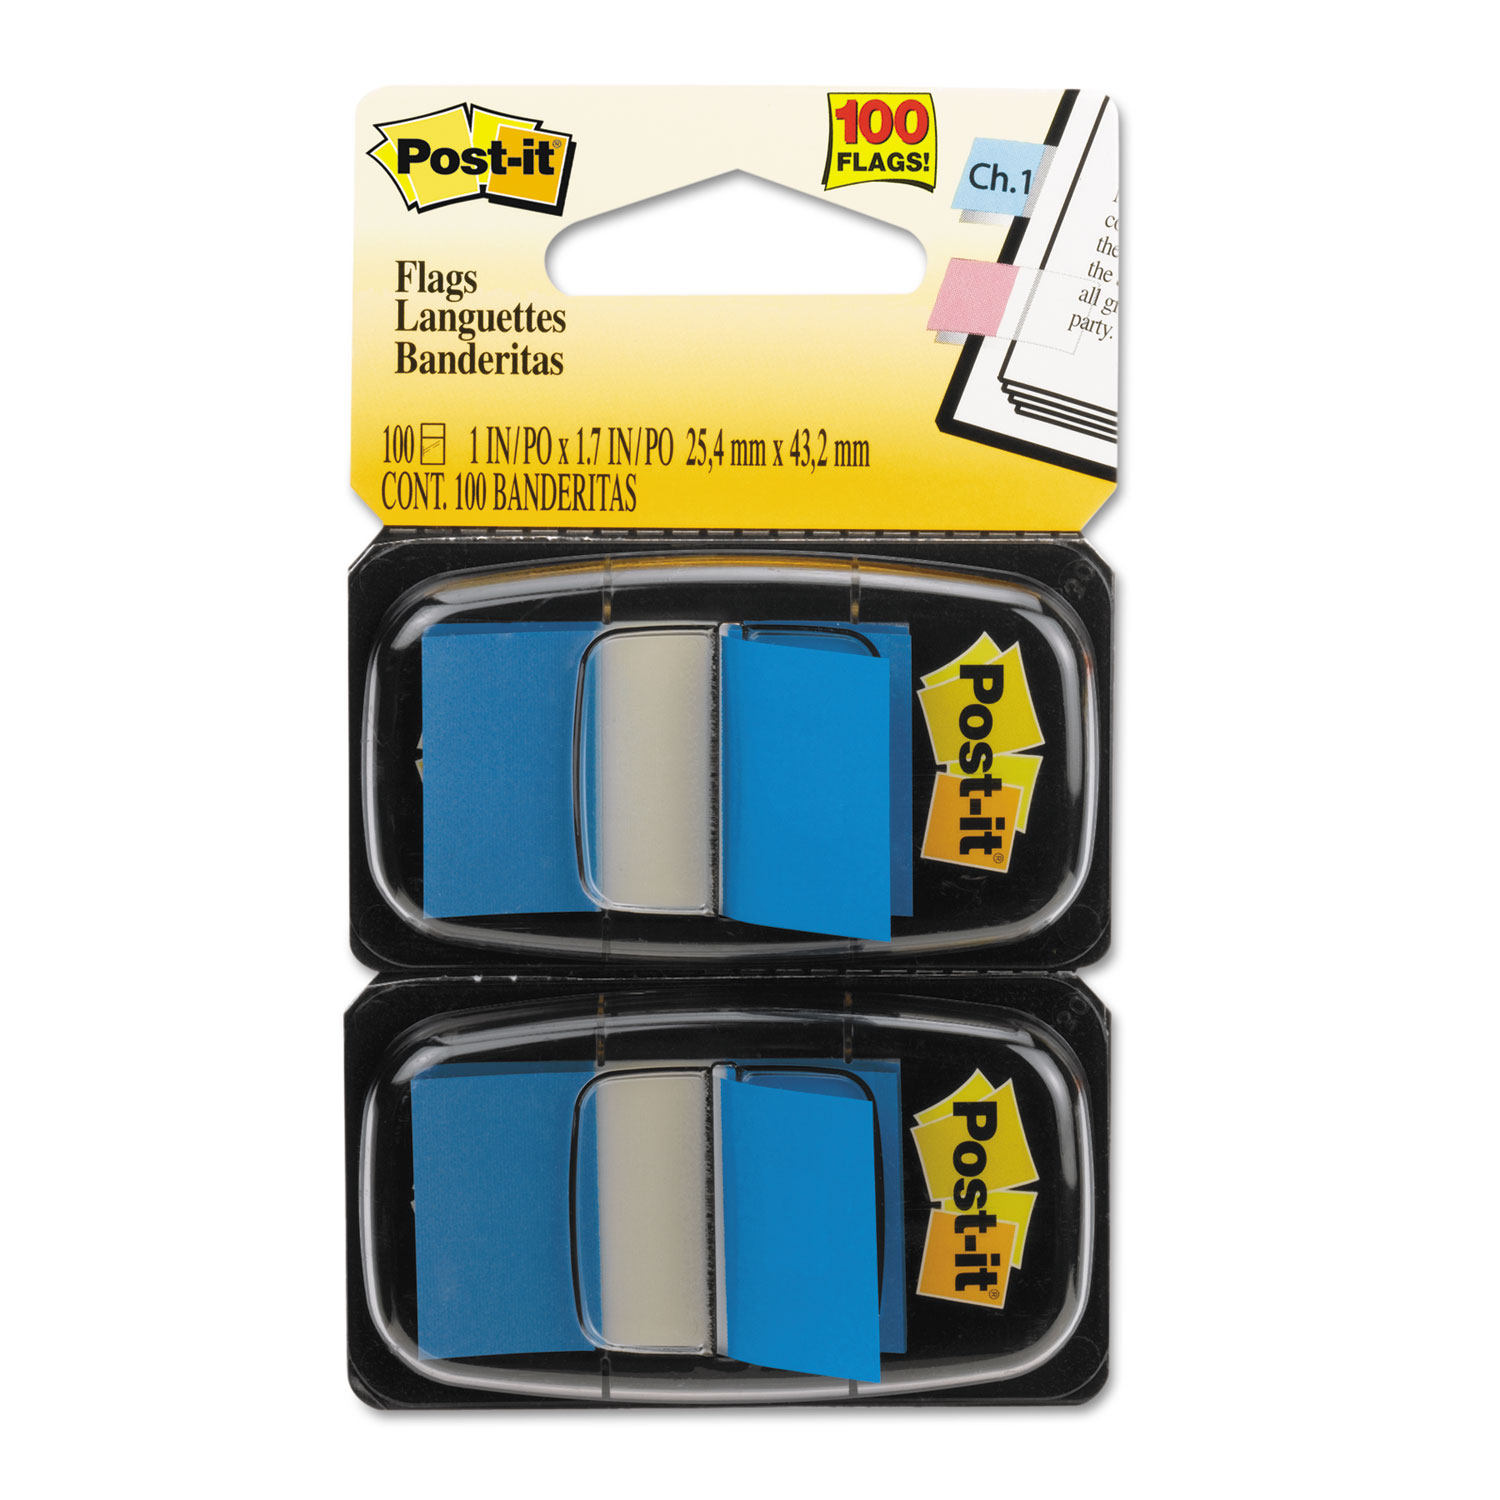  Post-it Flags 680-BE2 Standard Page Flags in Dispenser, Blue, 100 Flags/Dispenser (MMM680BE2) 